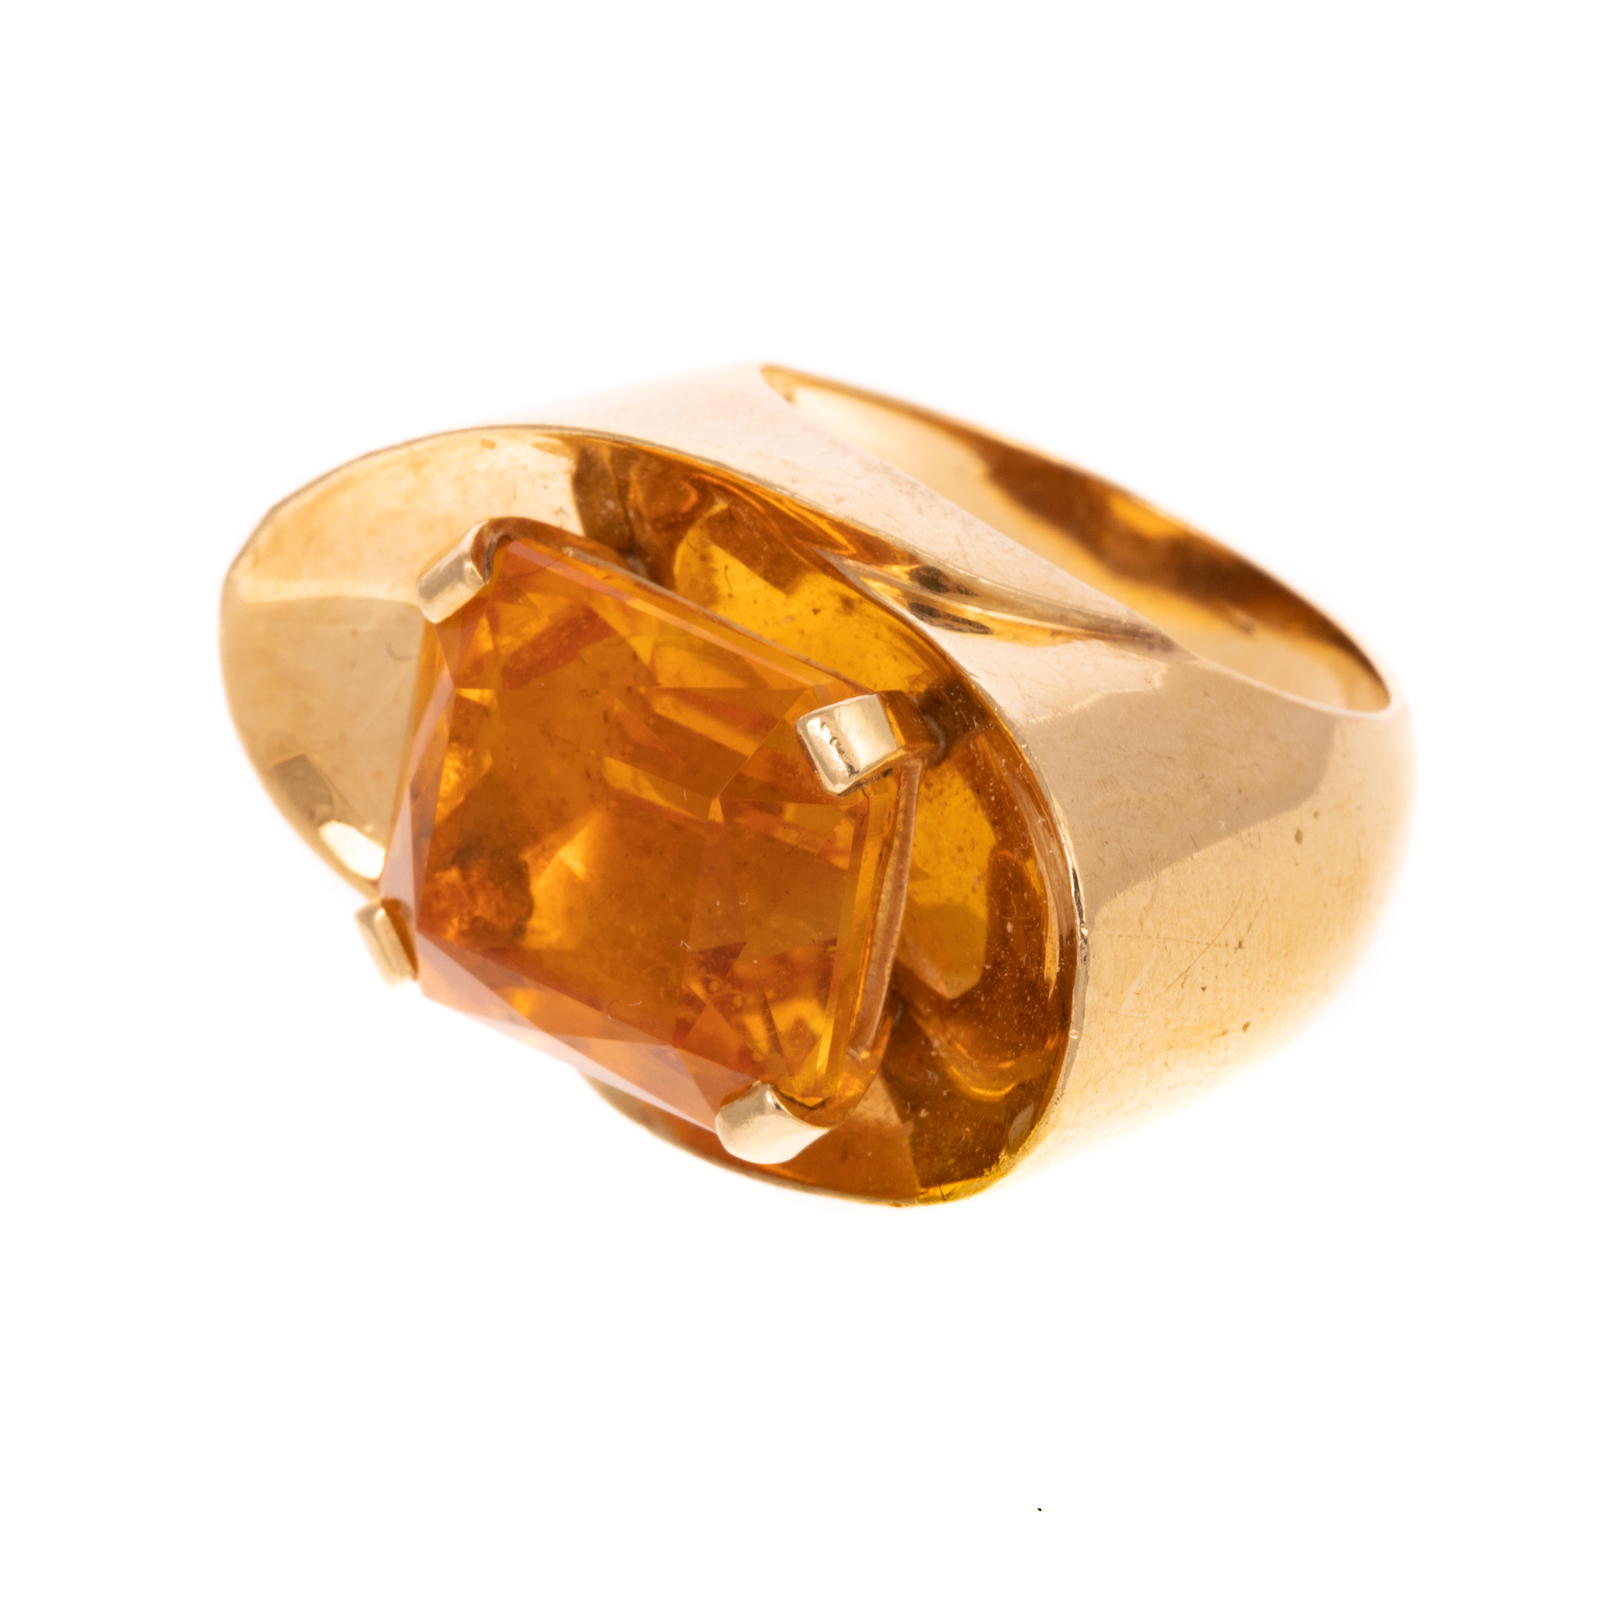 A WIDE CONCAVE CITRINE RING IN 33851f